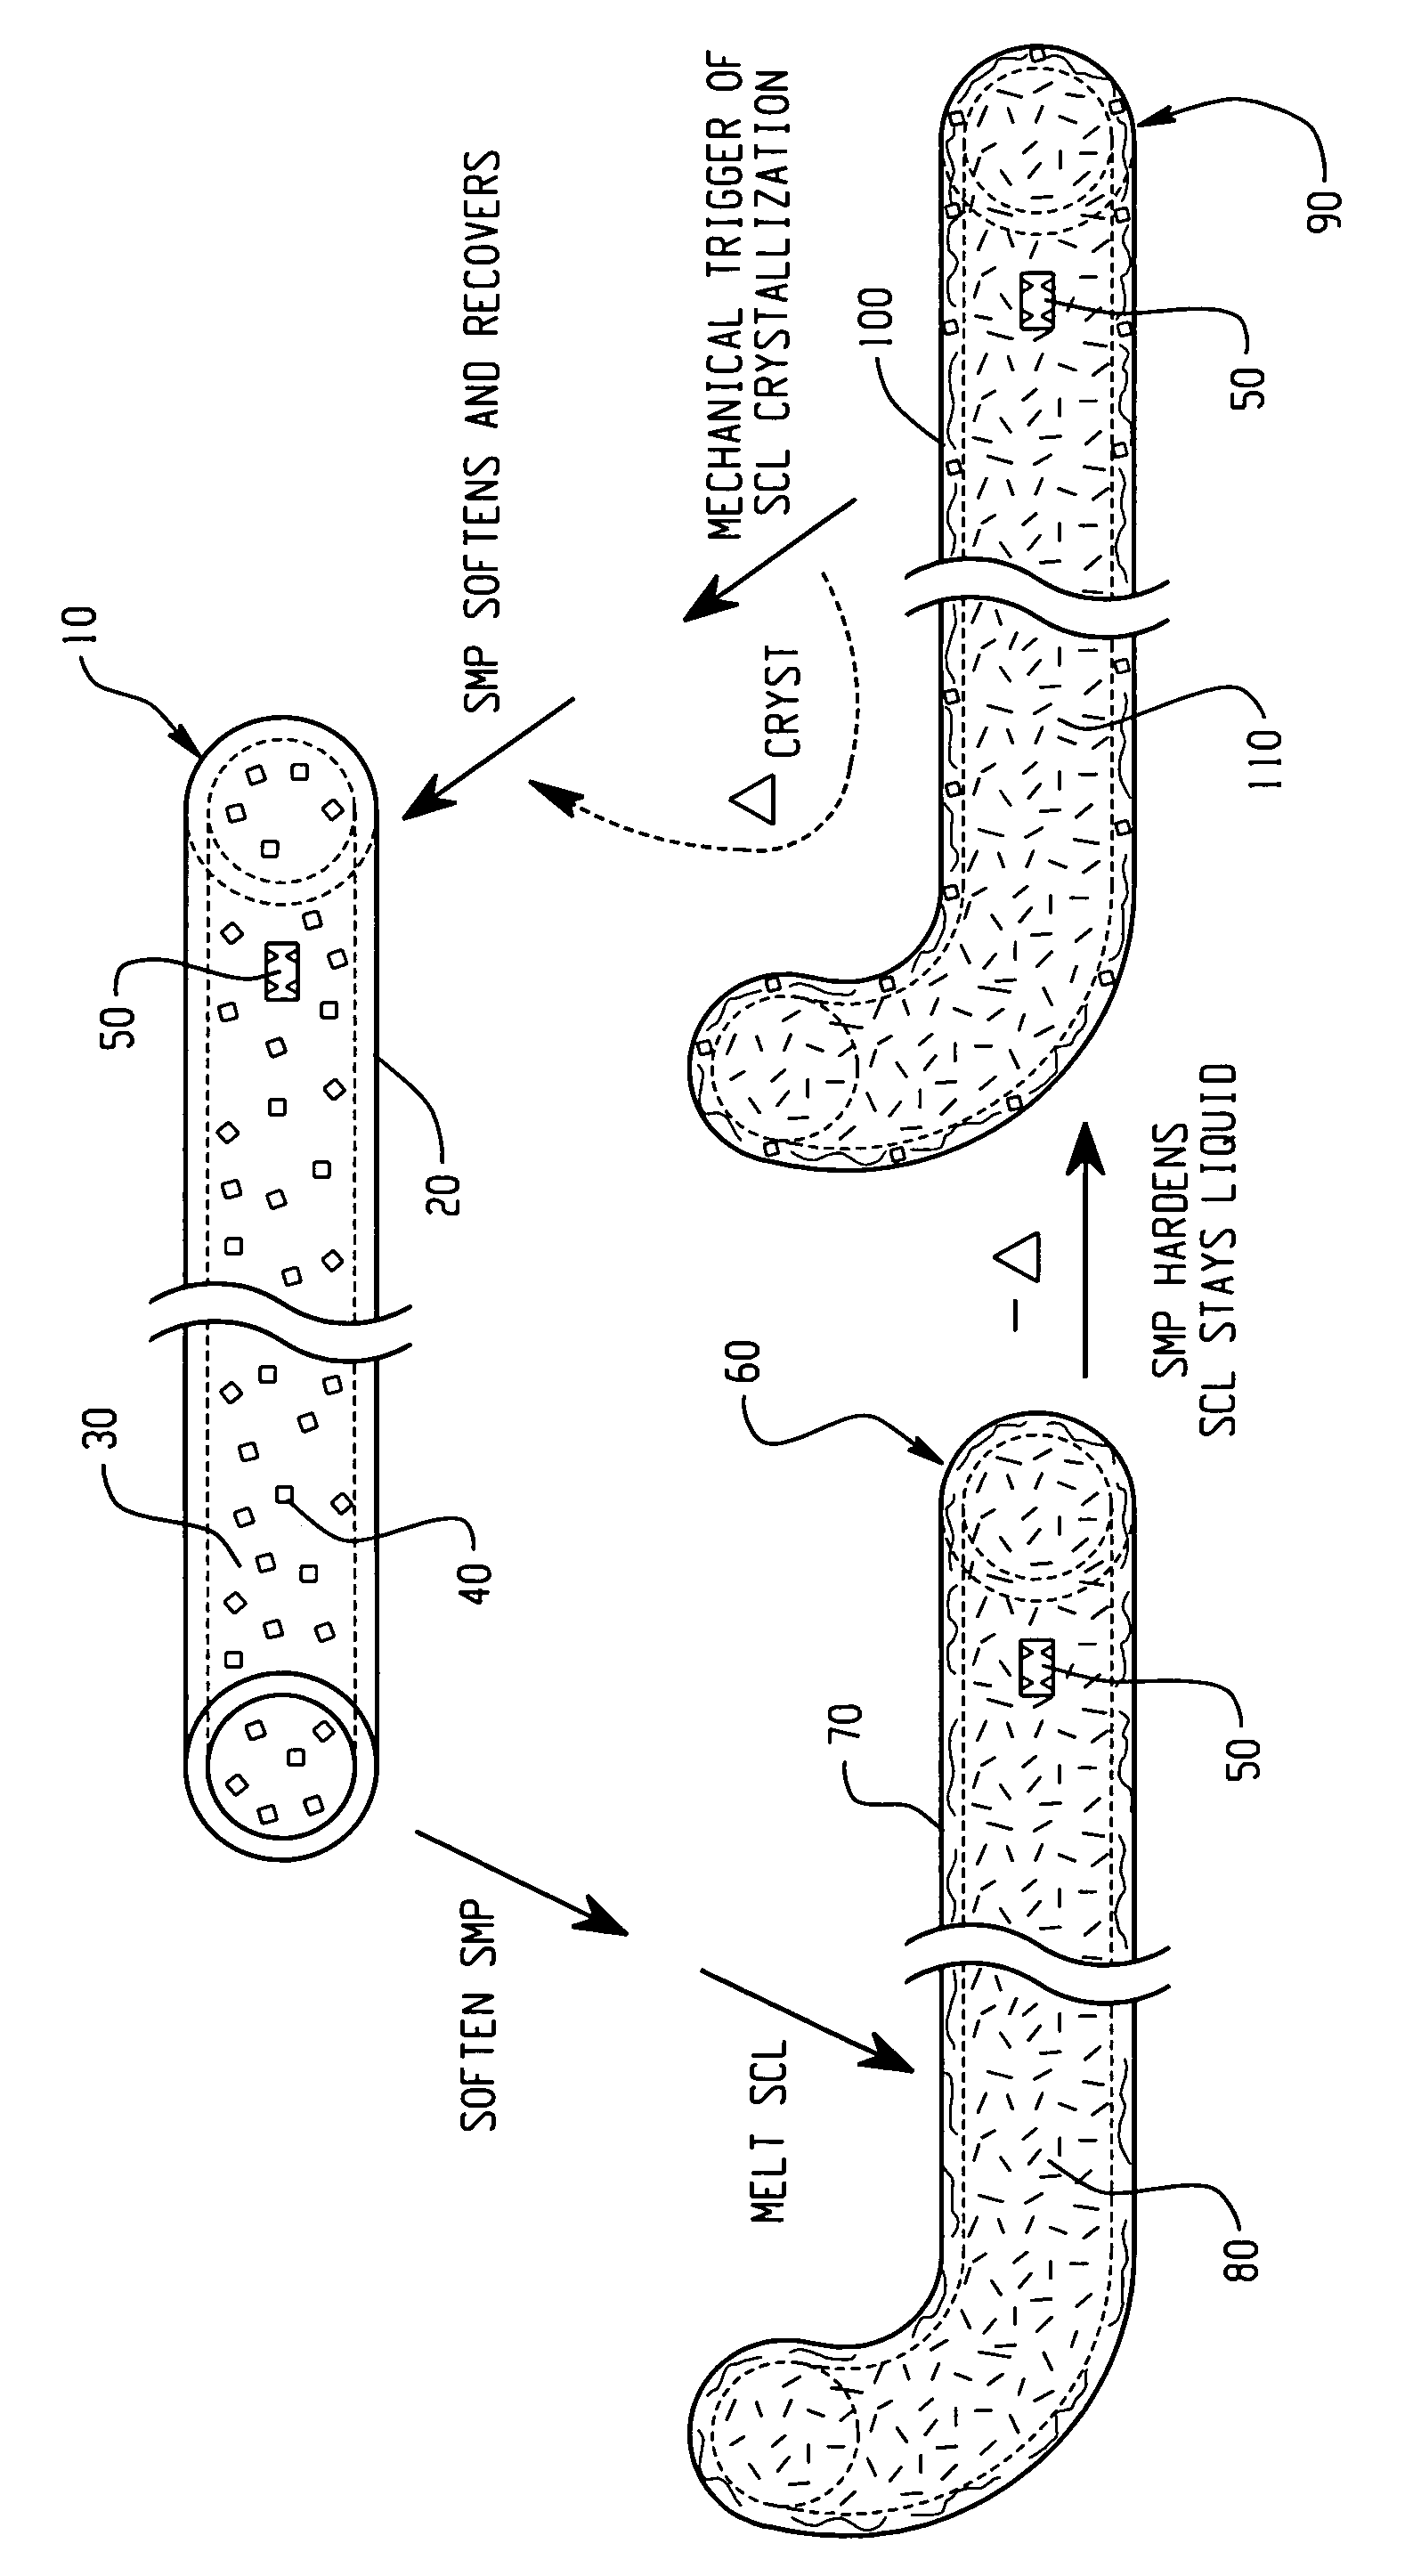 Mechanically activated shape memory device